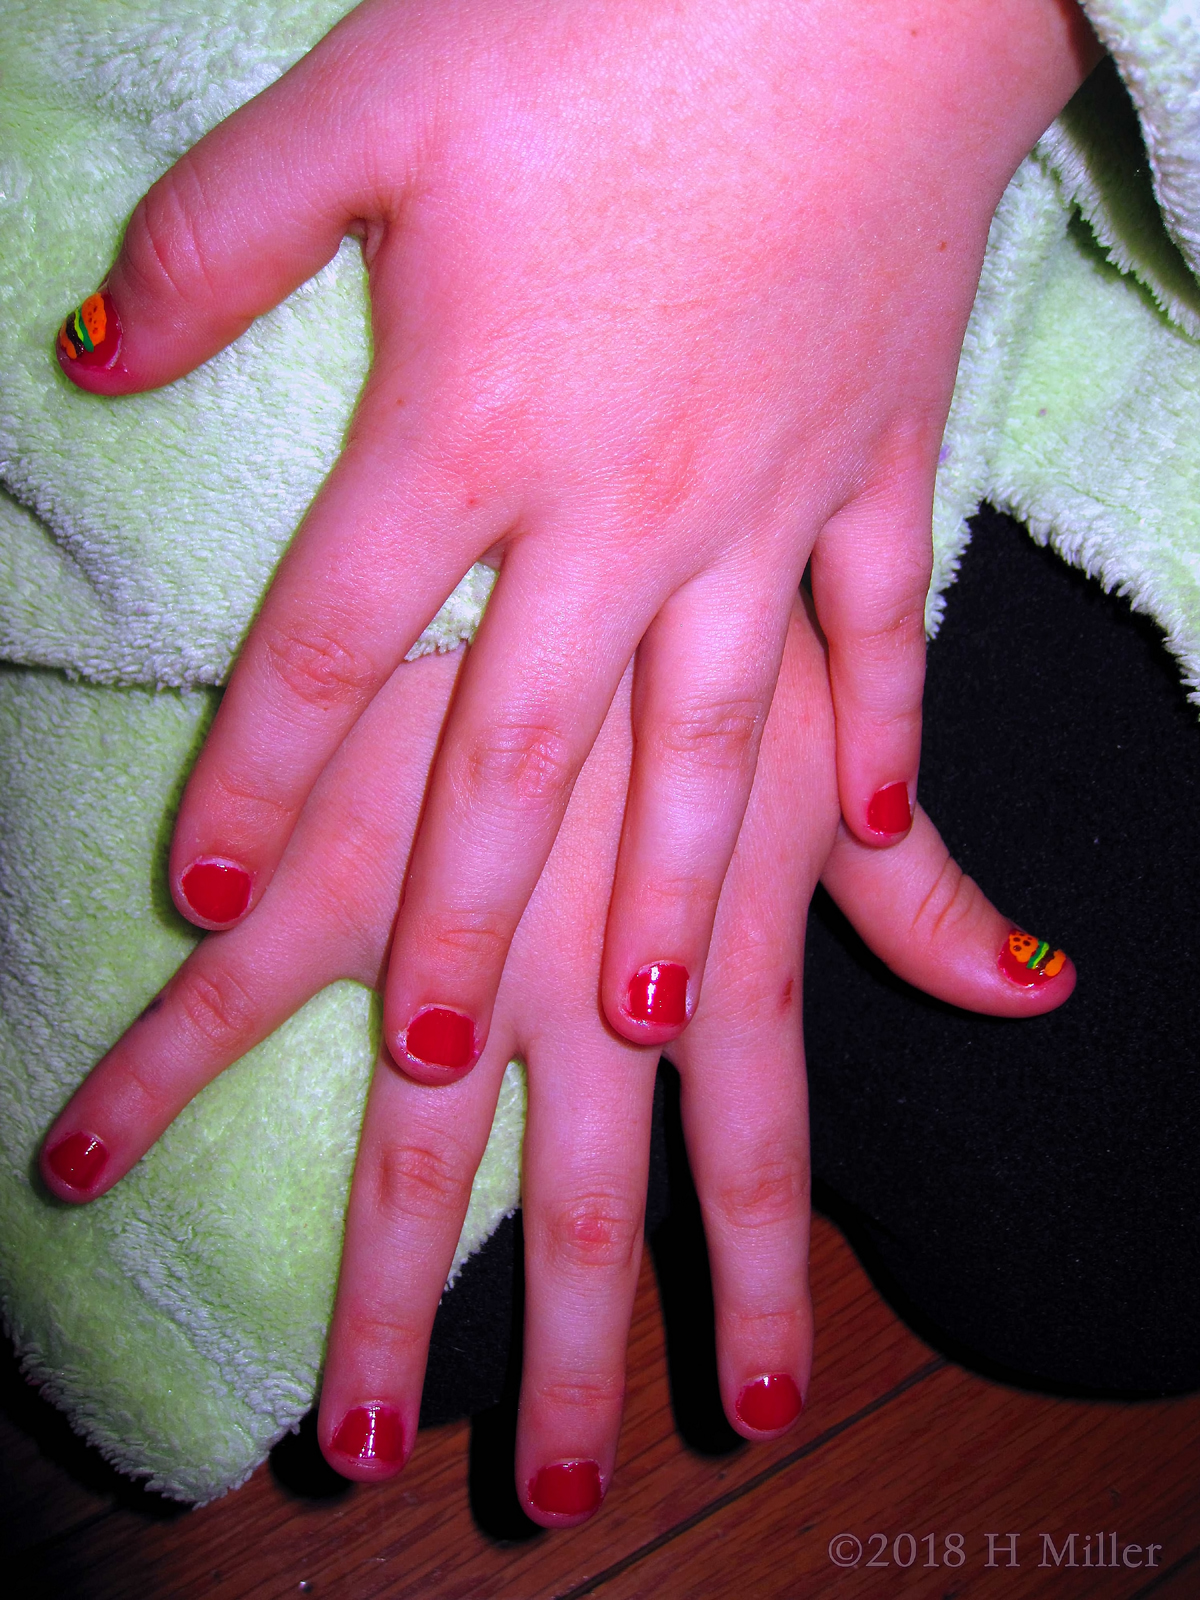 Red Base Girls Manicure With Accent Hamburger Nail Design. 